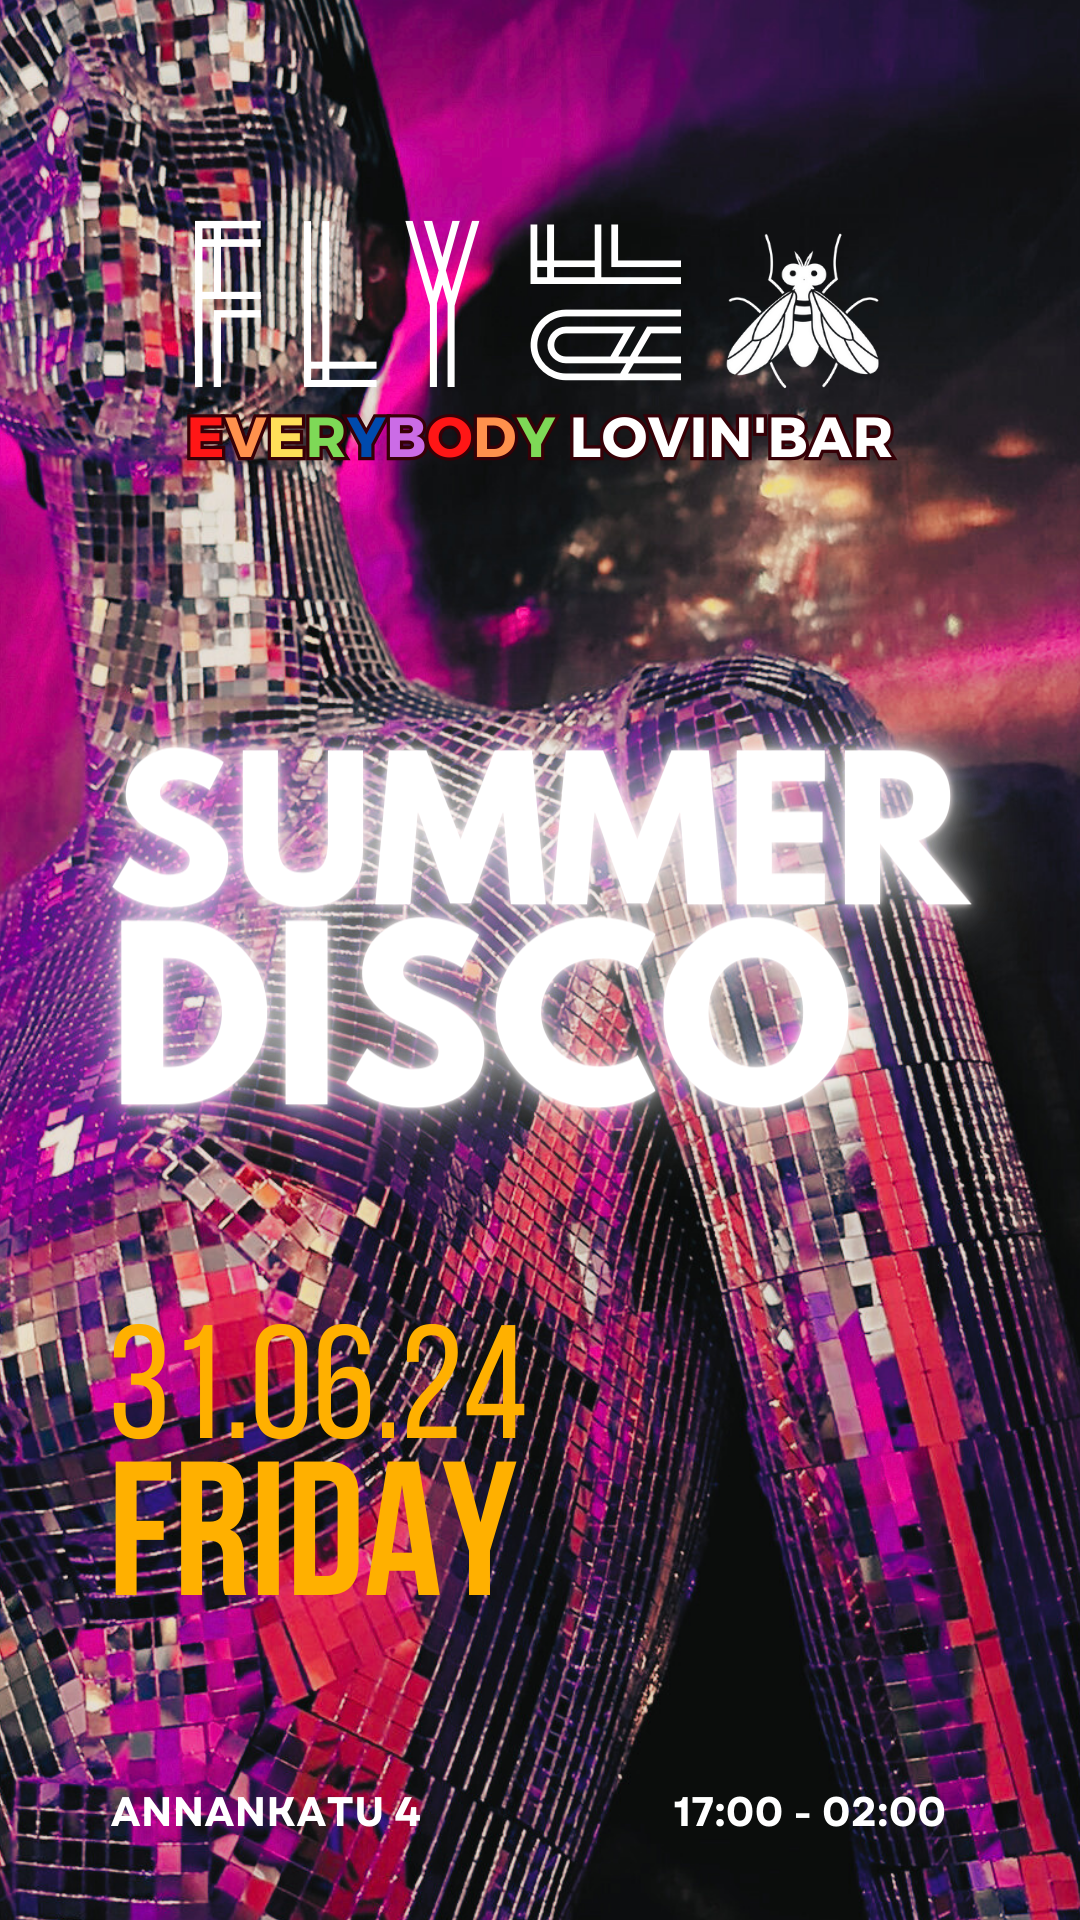 Kick off summer this Friday with "Summer Disco" We're turning FlyAF Bar into Disco HQ! 💃🕺 Groove to the hottest disco beats, rock your funkiest outfit, and dance like it's 1979! T 🗓️ Friday, May 31st 17:00-02:00